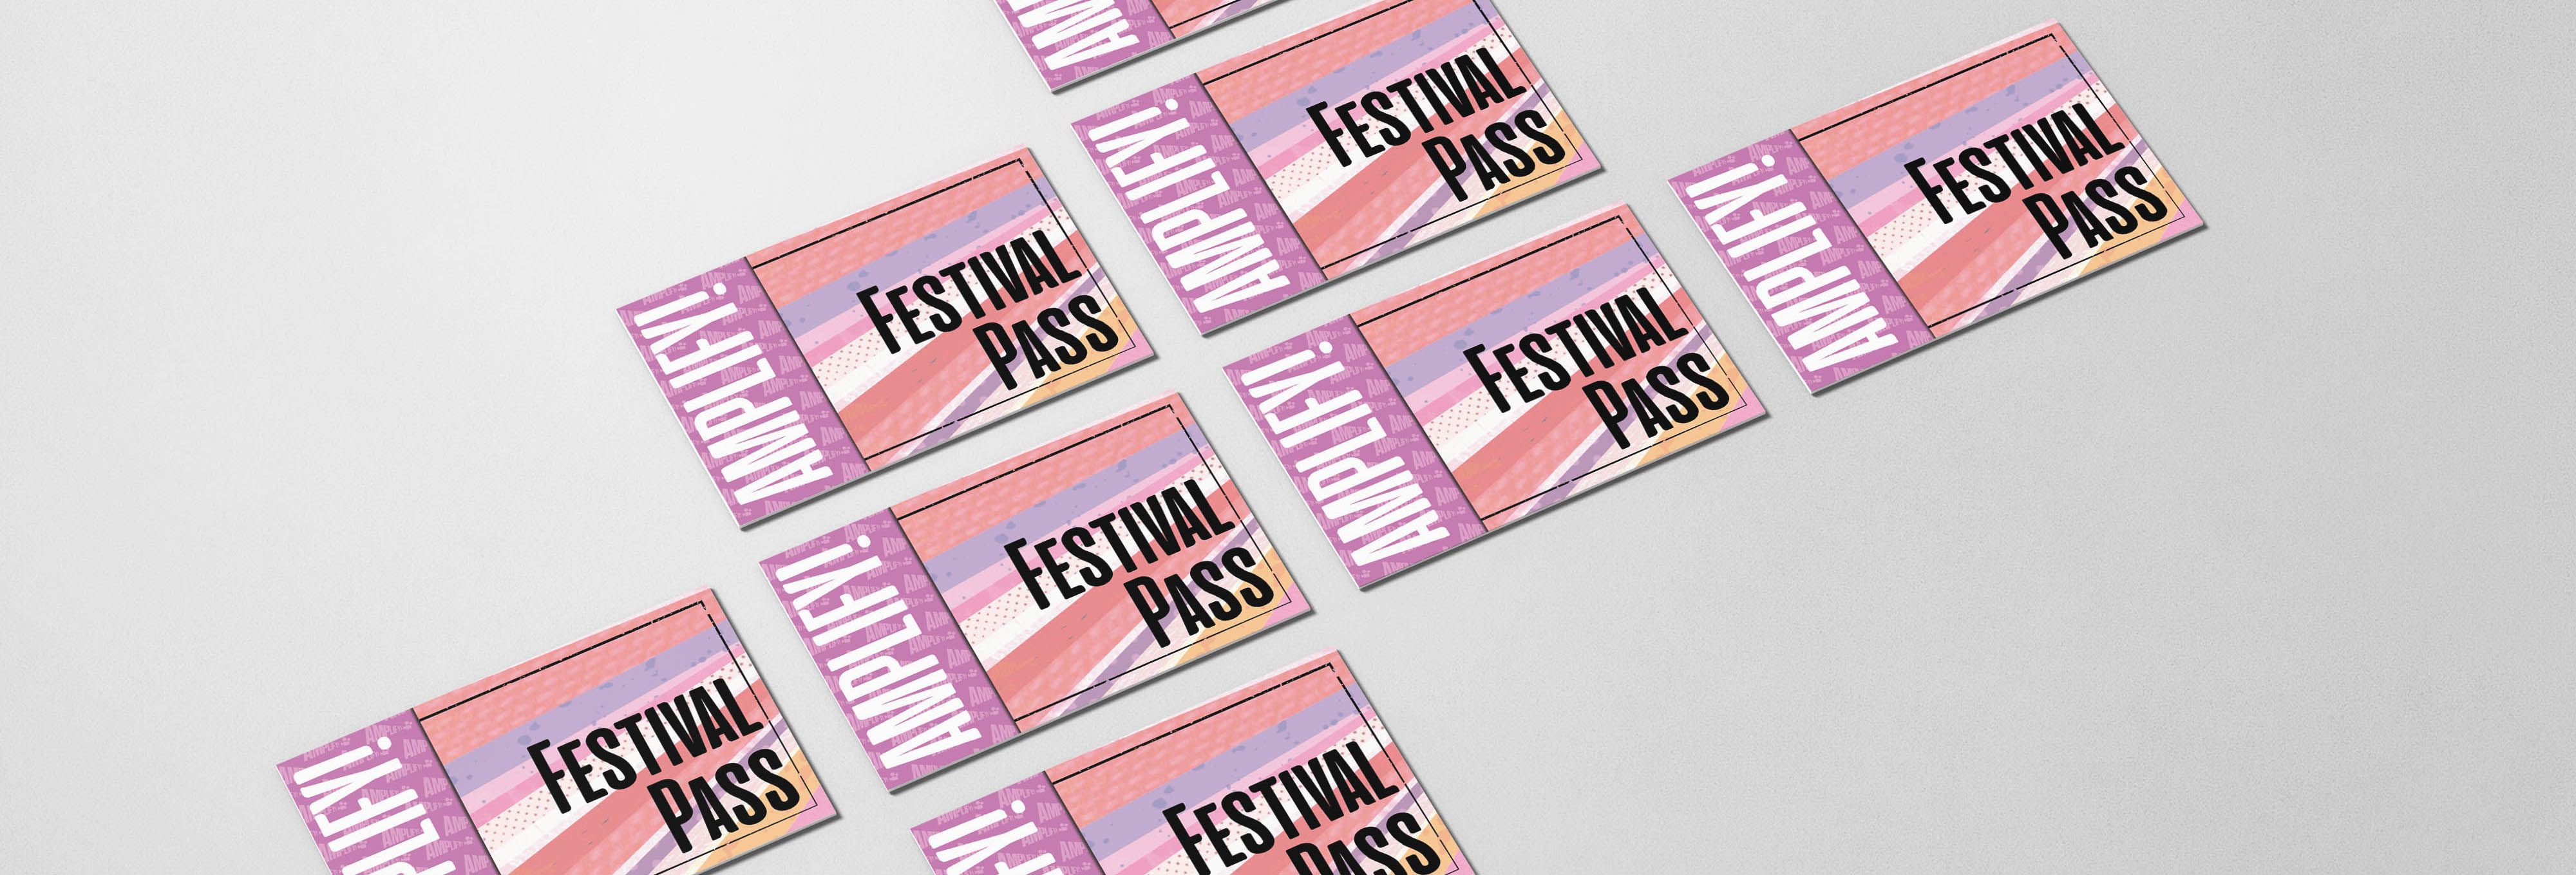 Amplify festival passes laid out on grey background